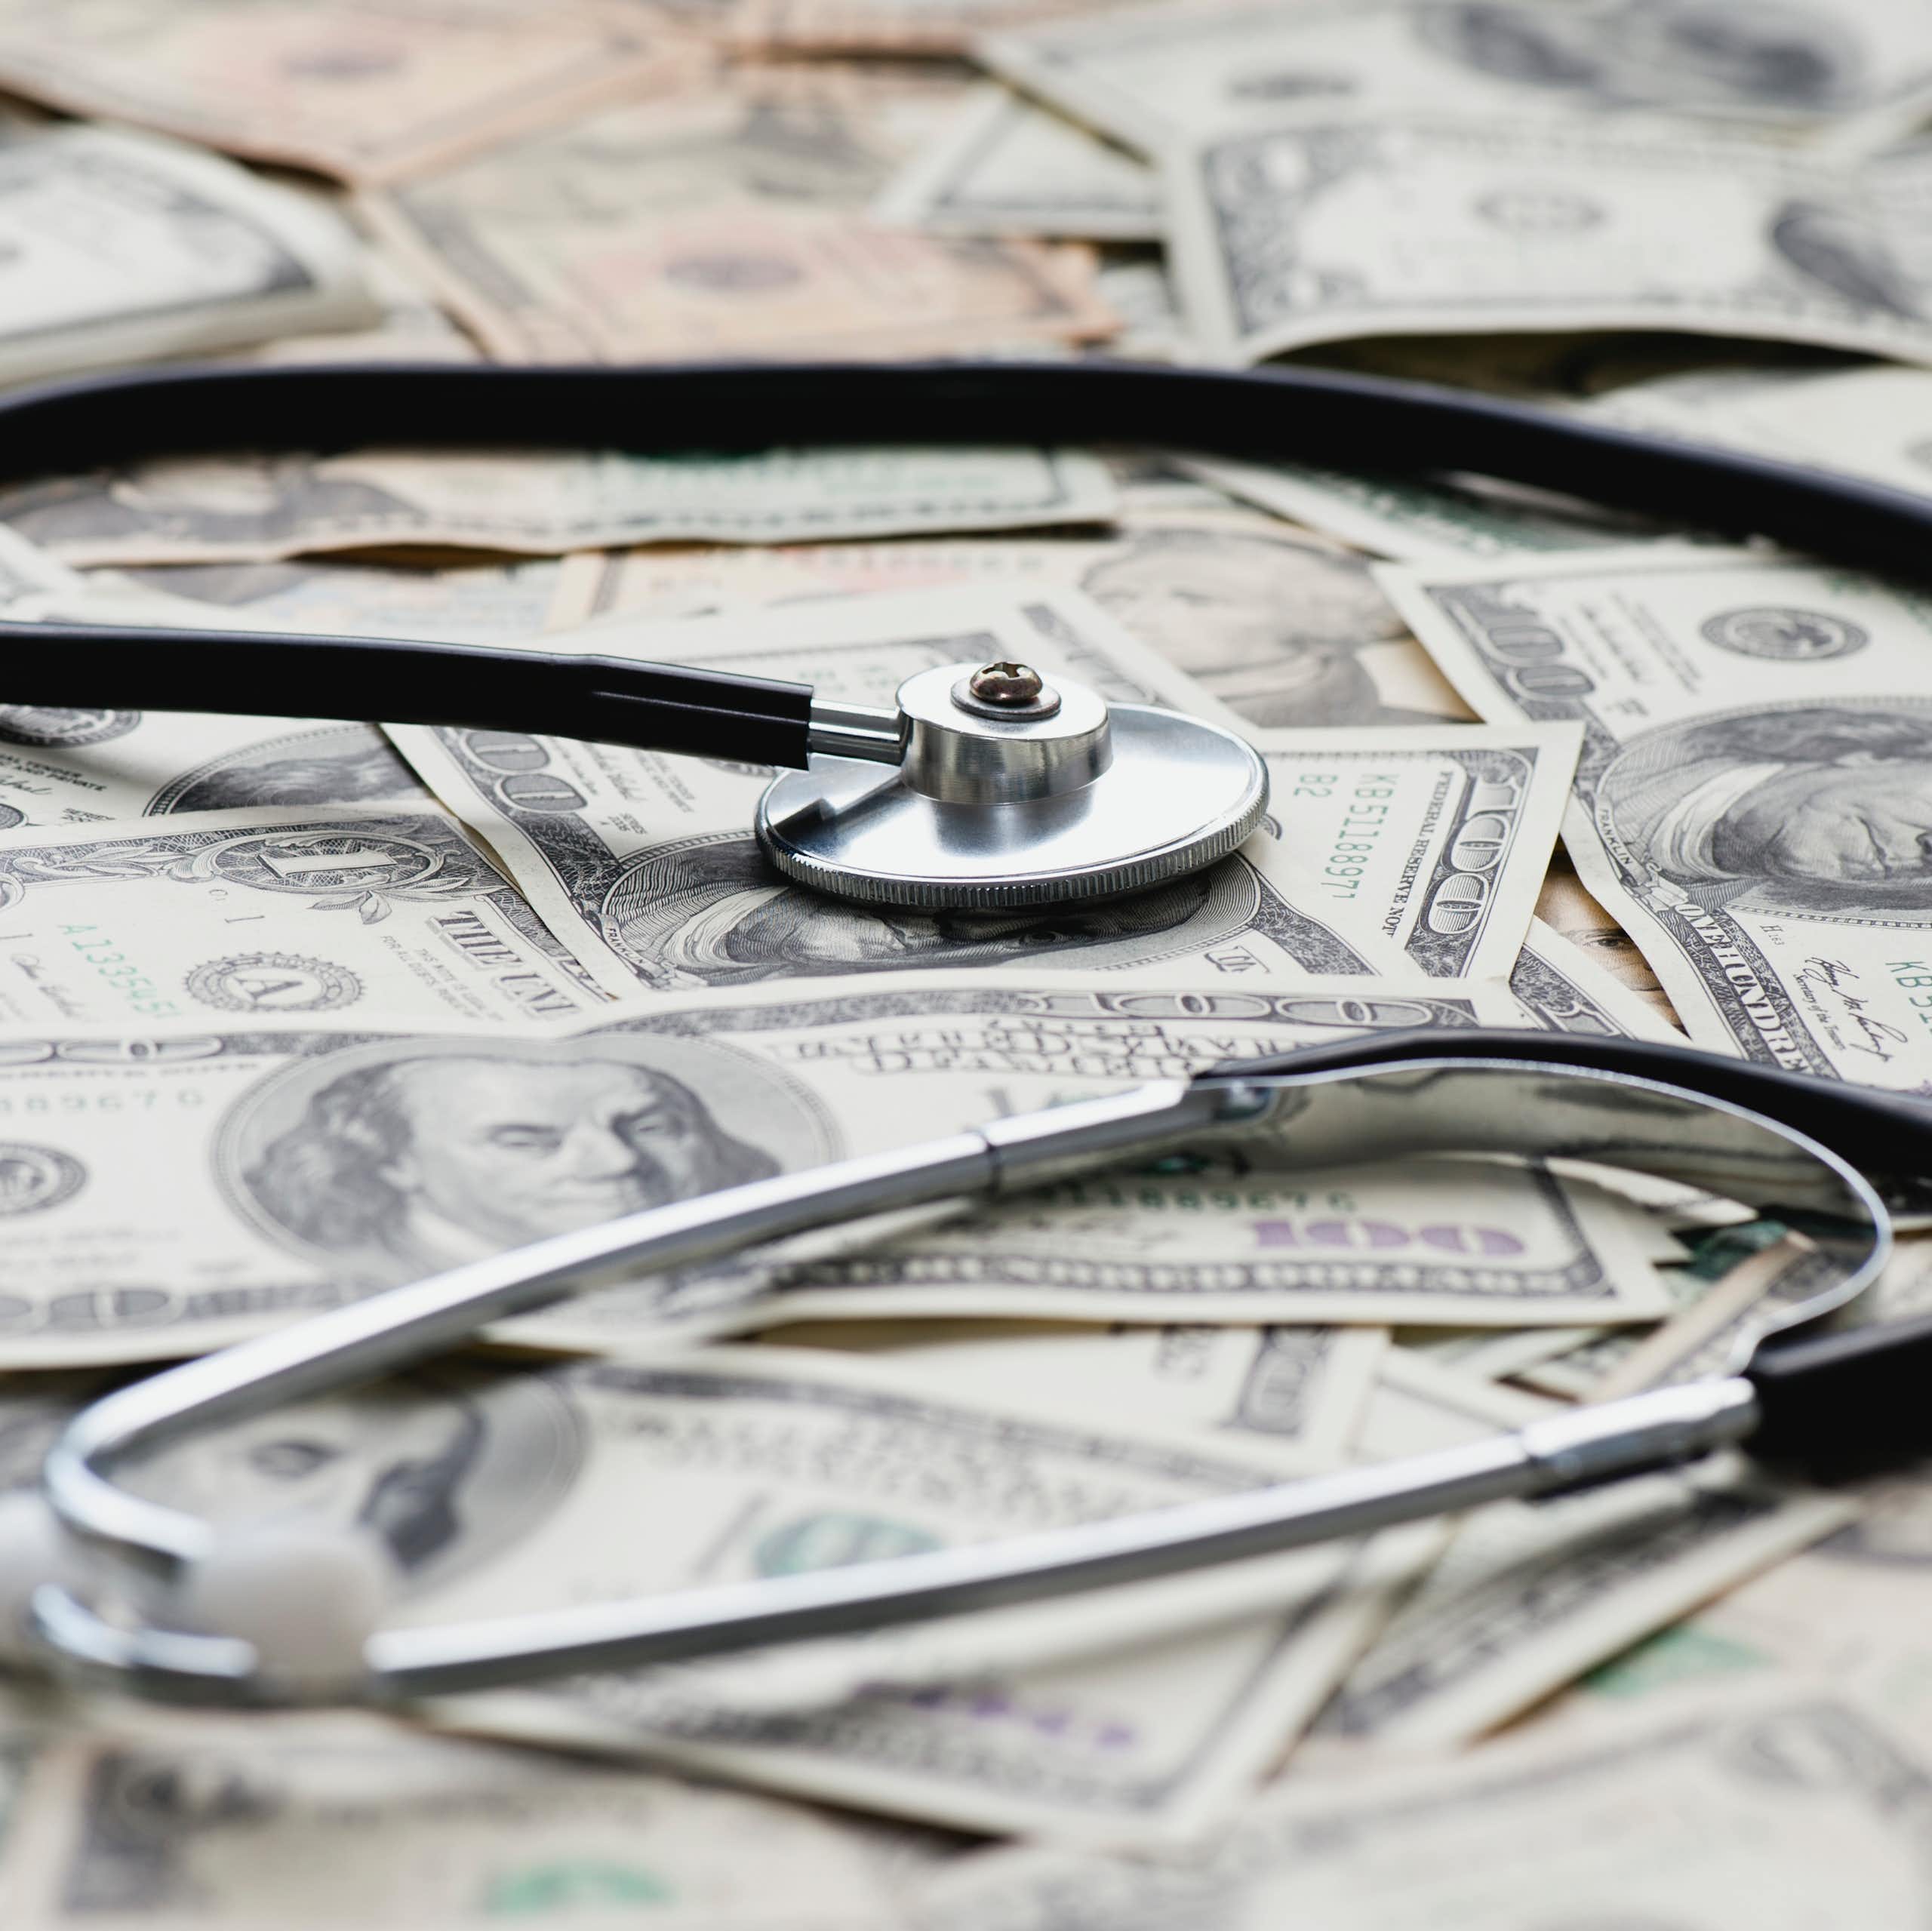 A stethoscope rests on a pile of $100 bills.